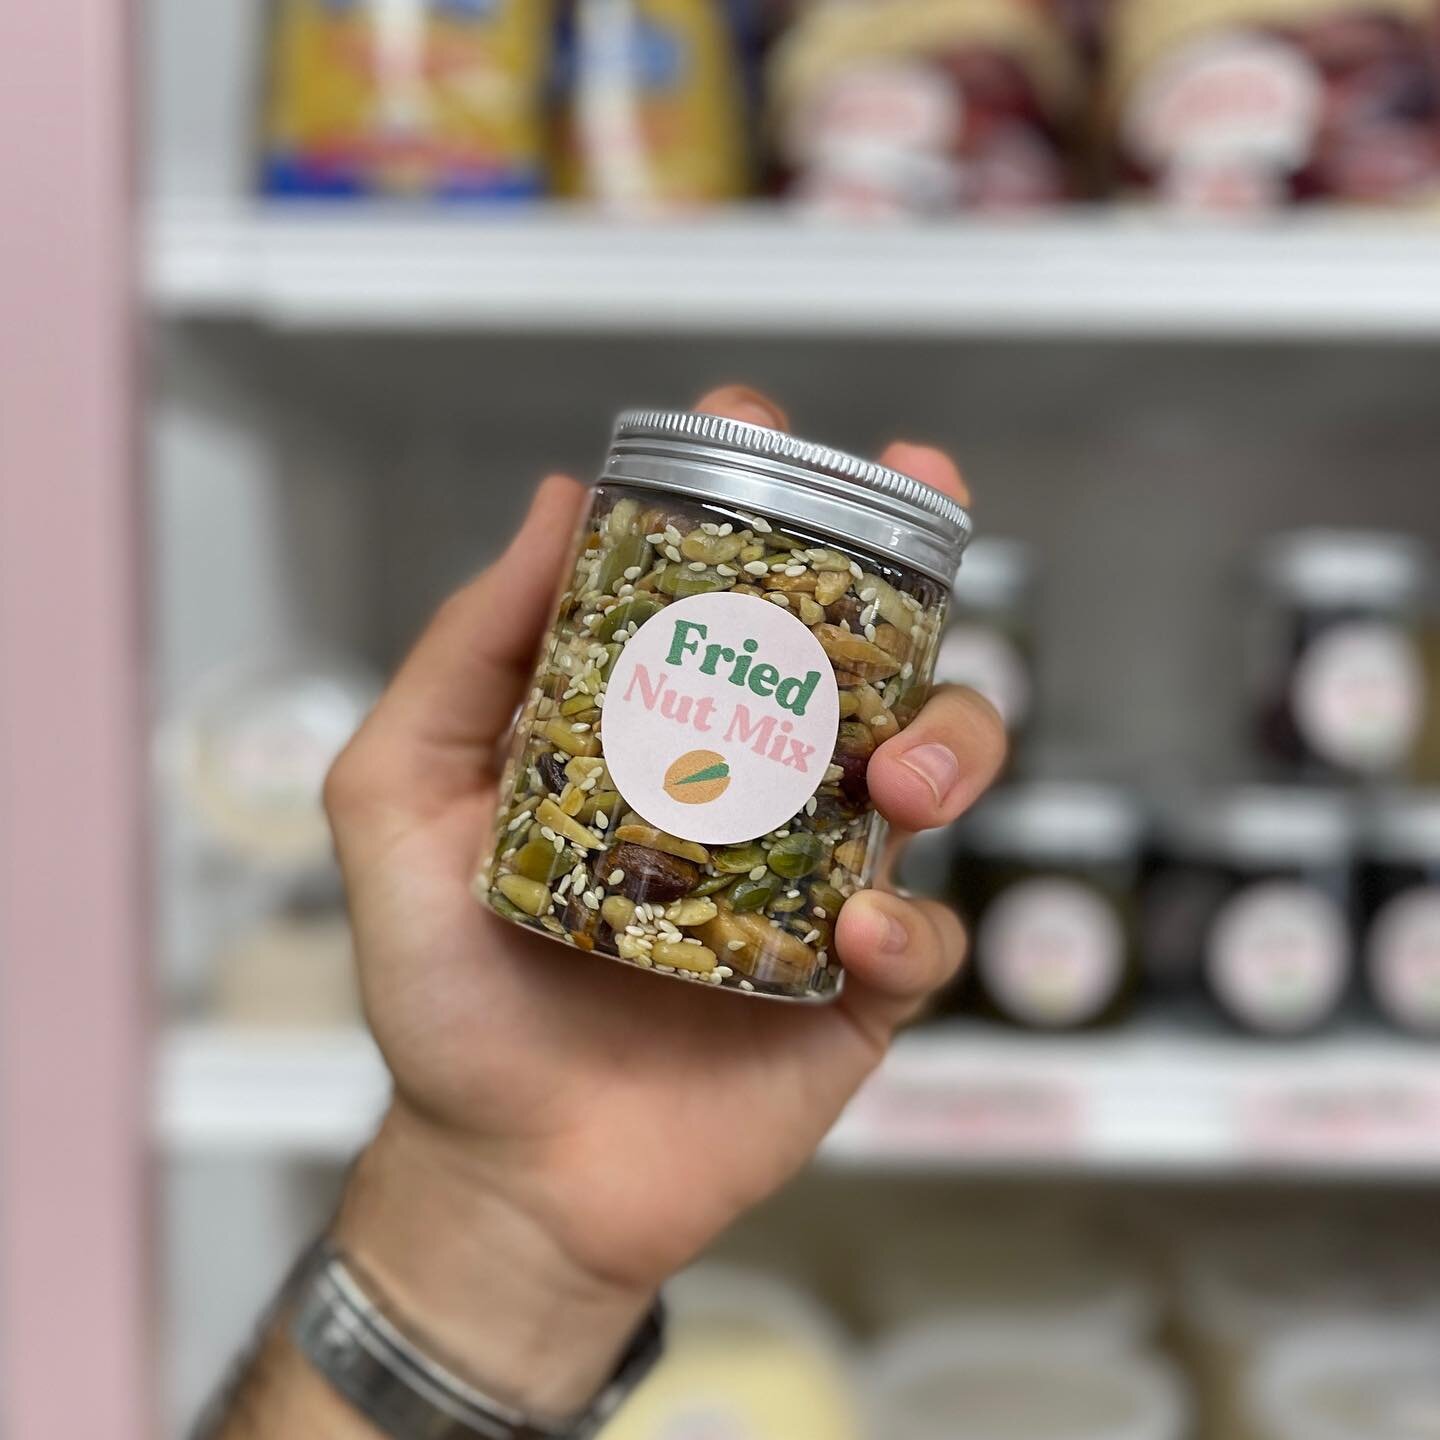 ✨NEW✨Goodies, spices, snacks and more on the e-Grocer this week! 🍋💻💫 Stay tuned for new additions throughout the month as we grow our @edysgrocer online shop and bring the magic of Lebanese goods to you across the country!! Remember, we ship natio